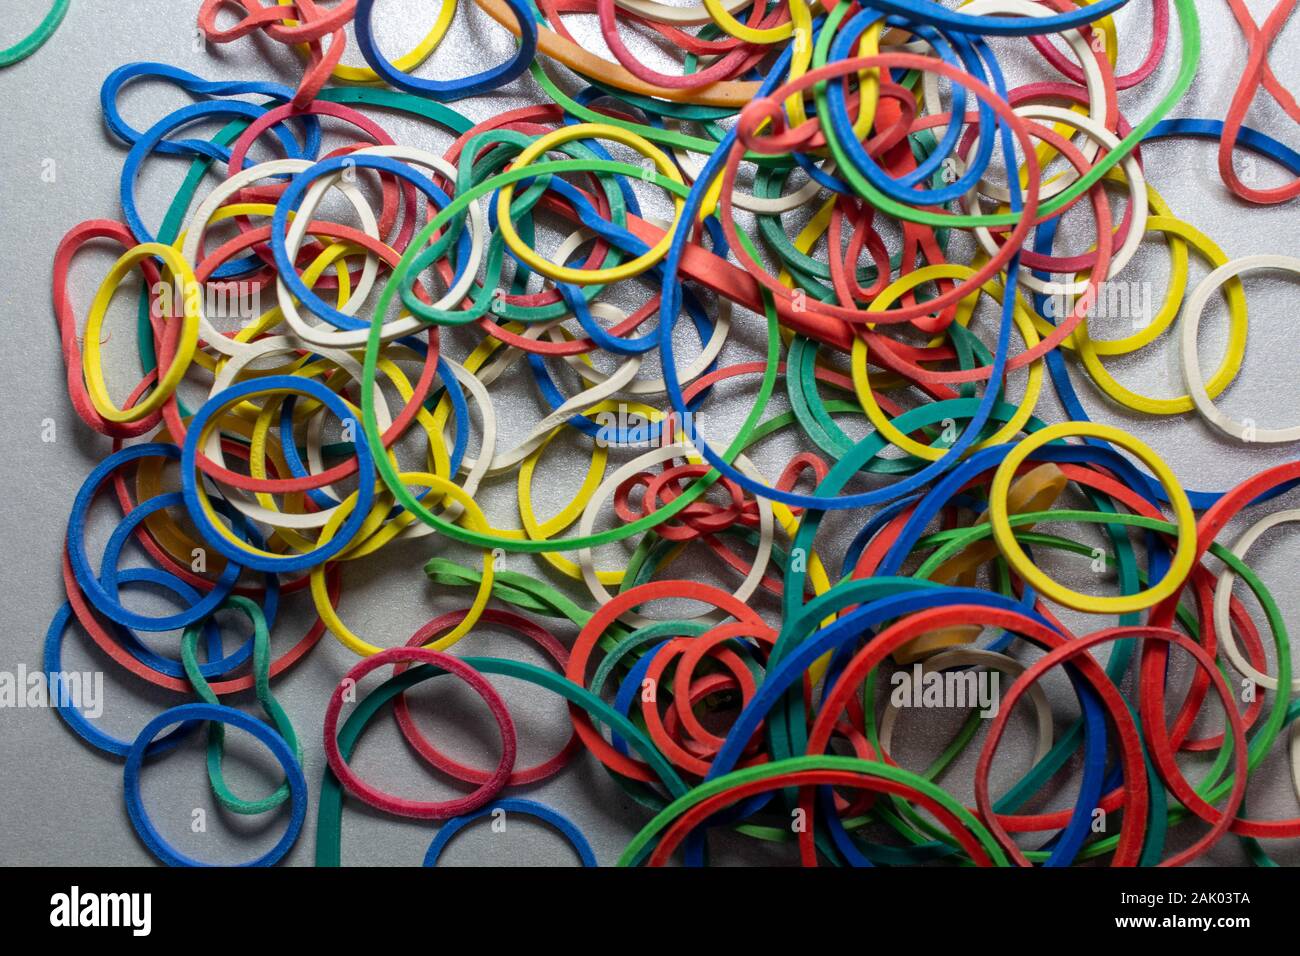 colored rubber bands on a table Stock Photo